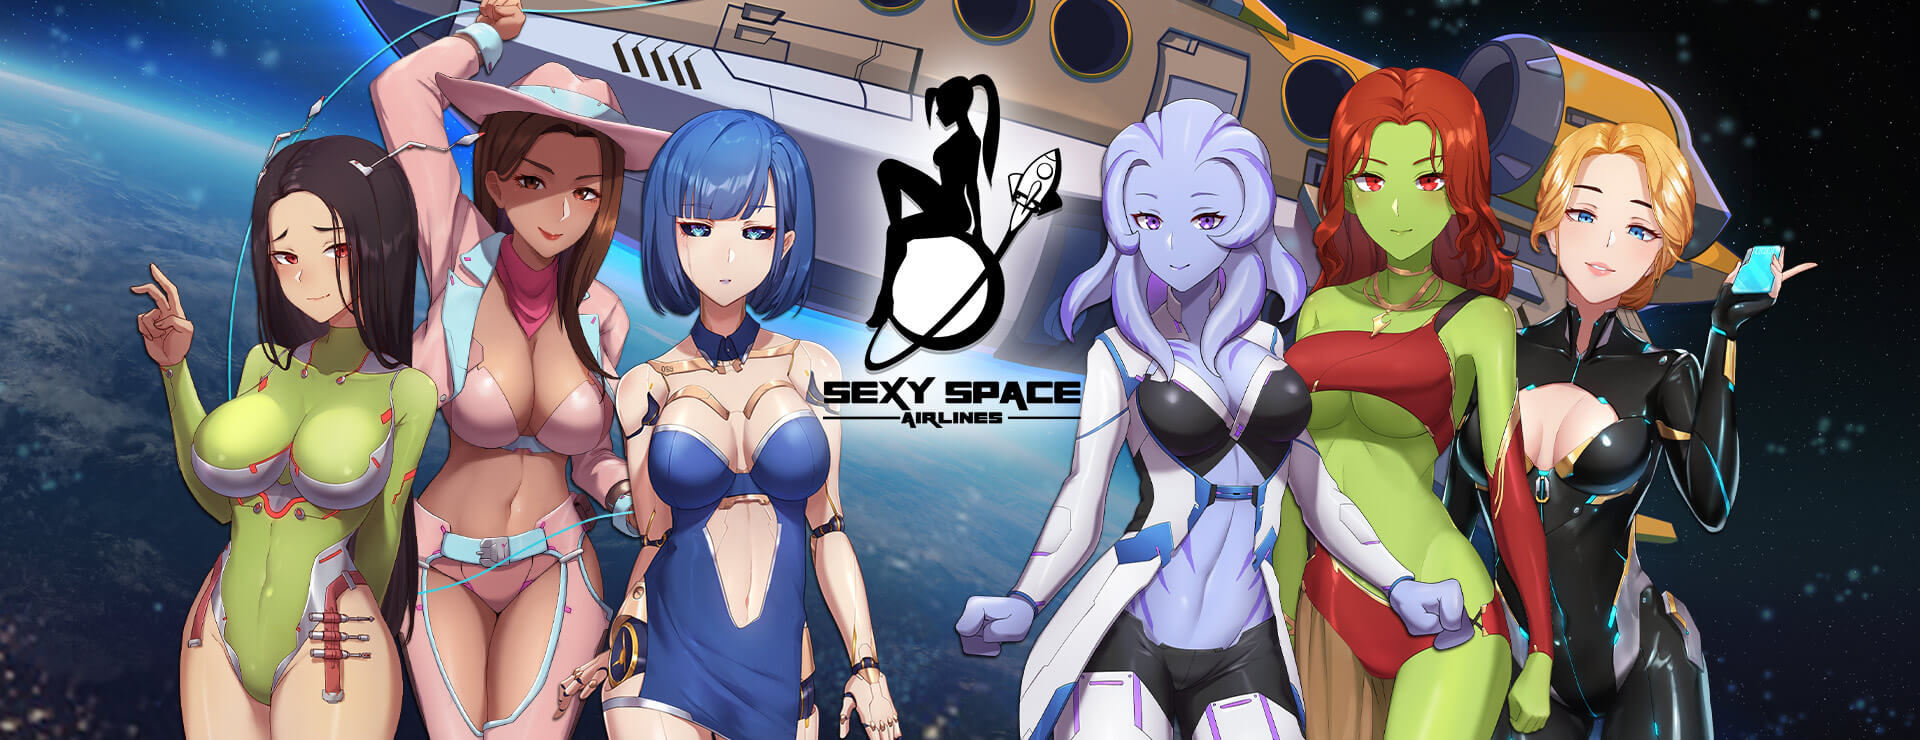 Sexy Space Airlines - Casual Juego